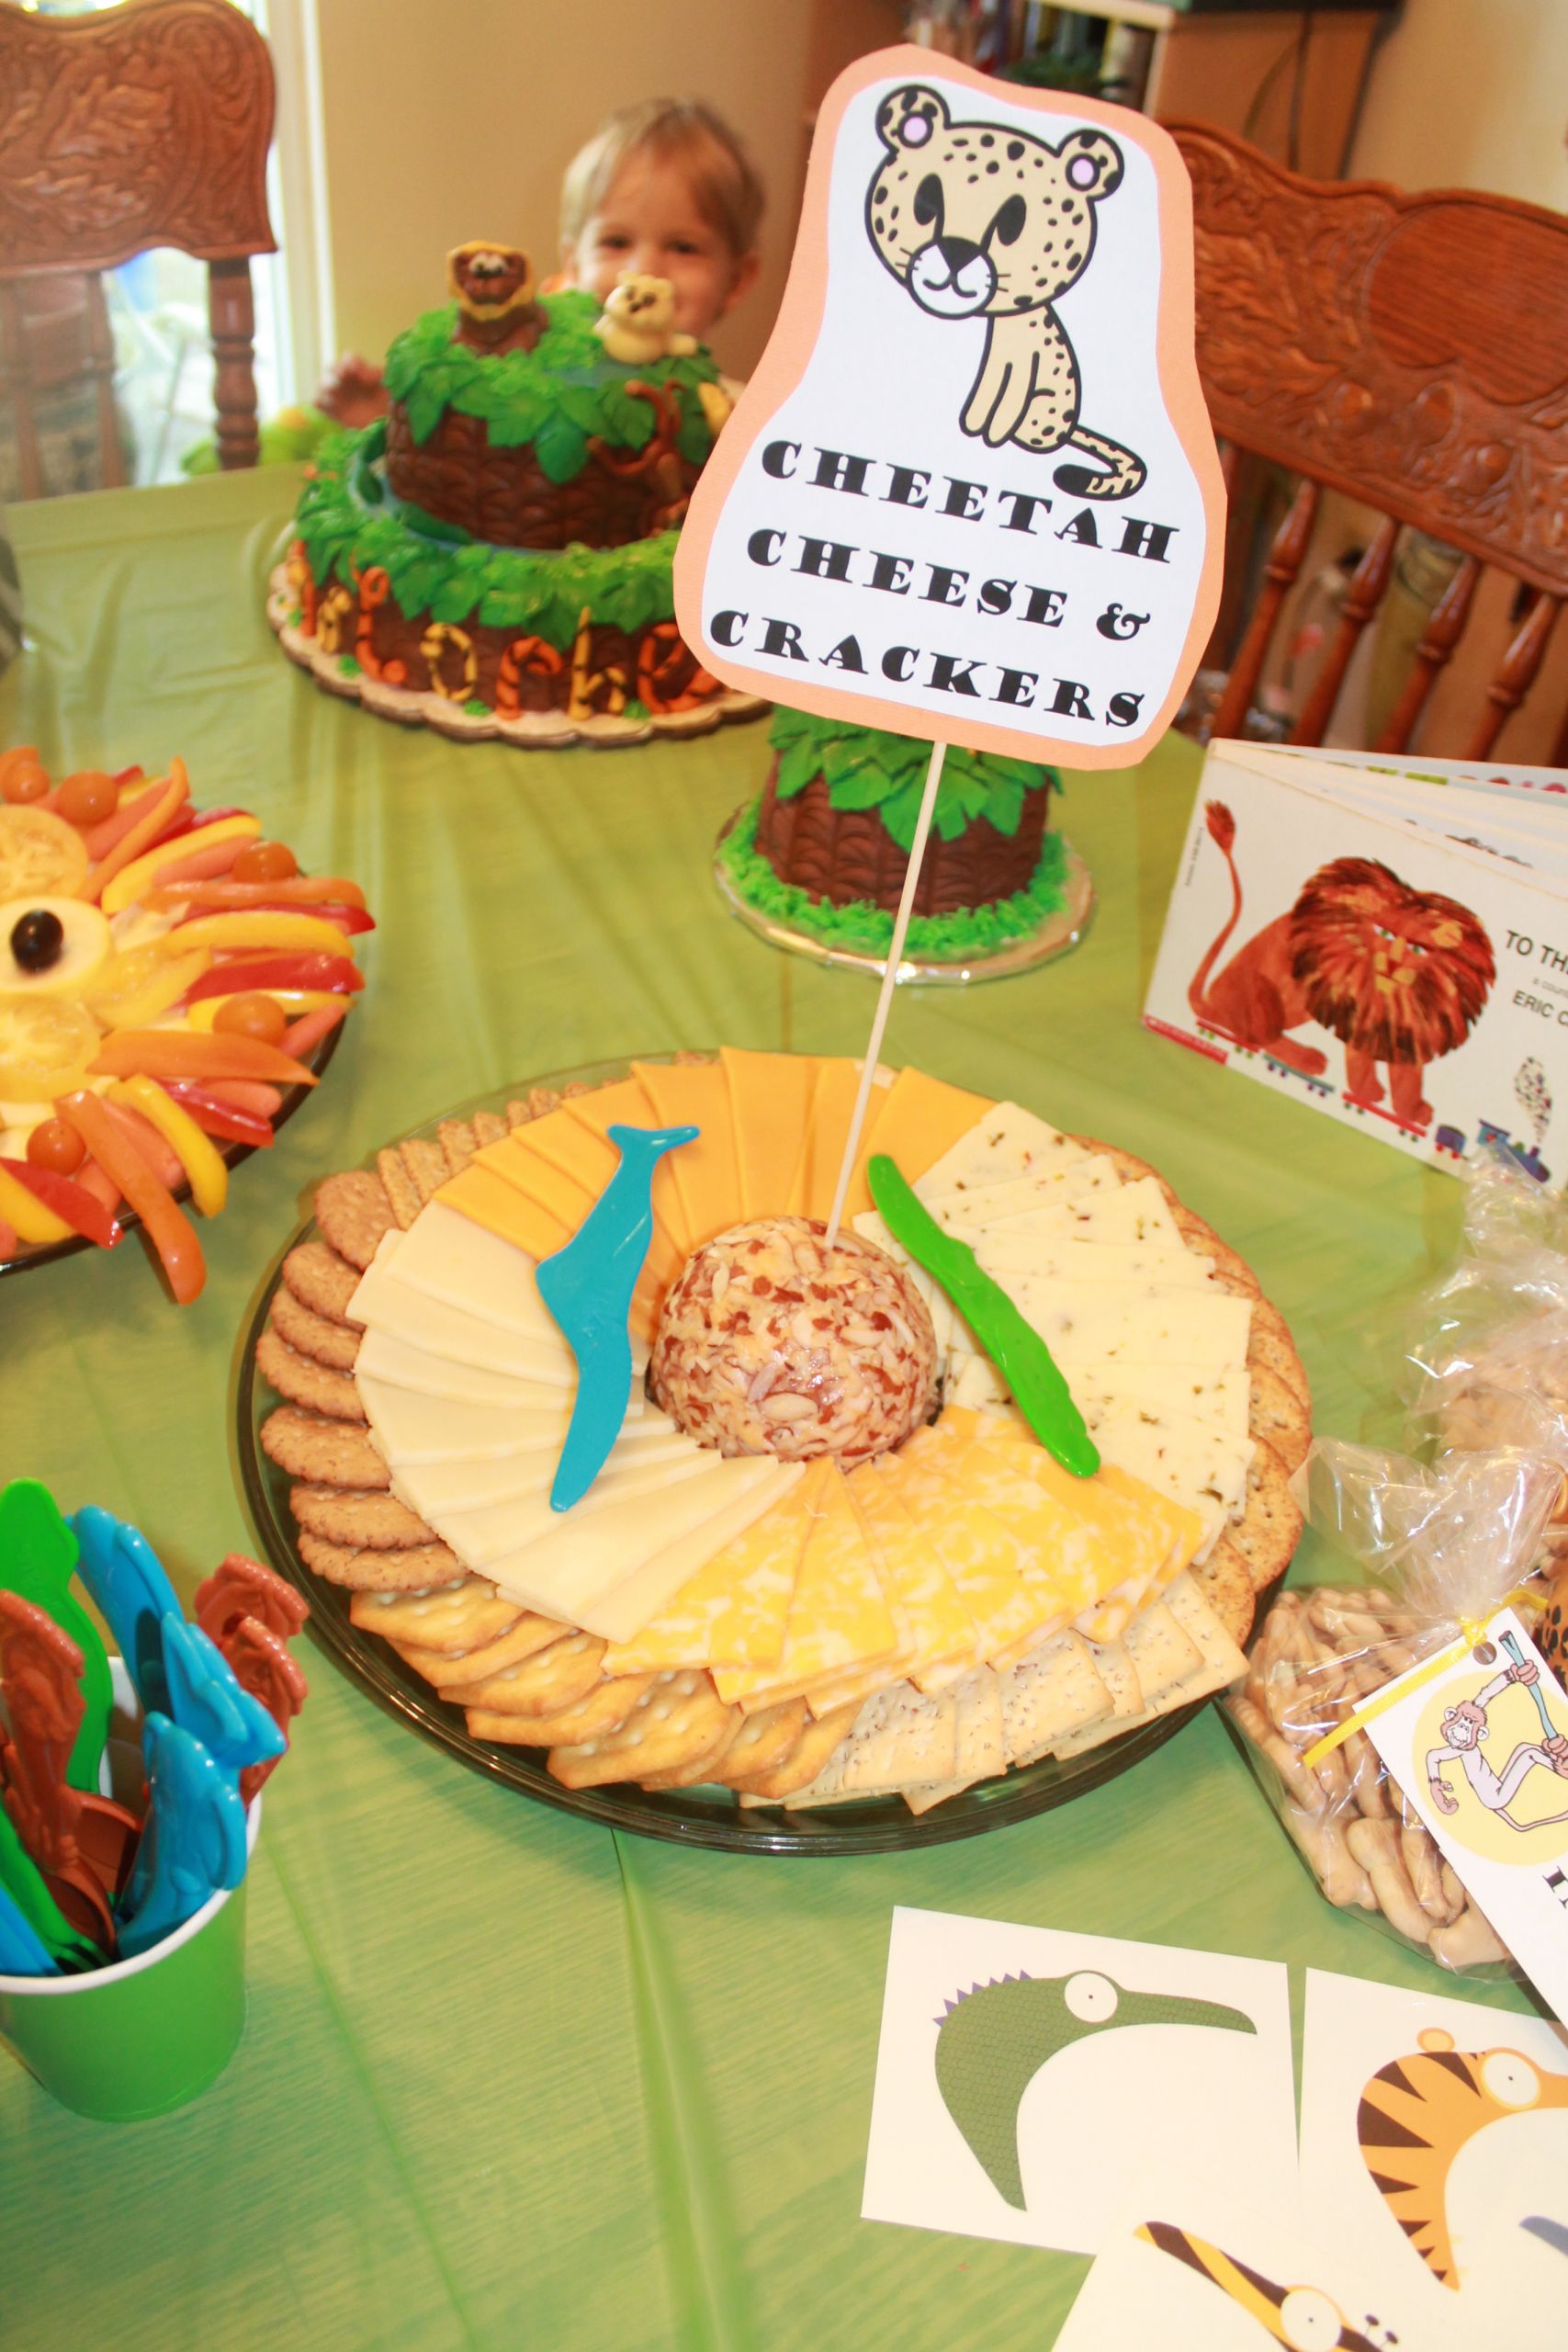 Zoo Birthday Party Food Ideas
 Cheetah cheese and crackers and other food and decoration